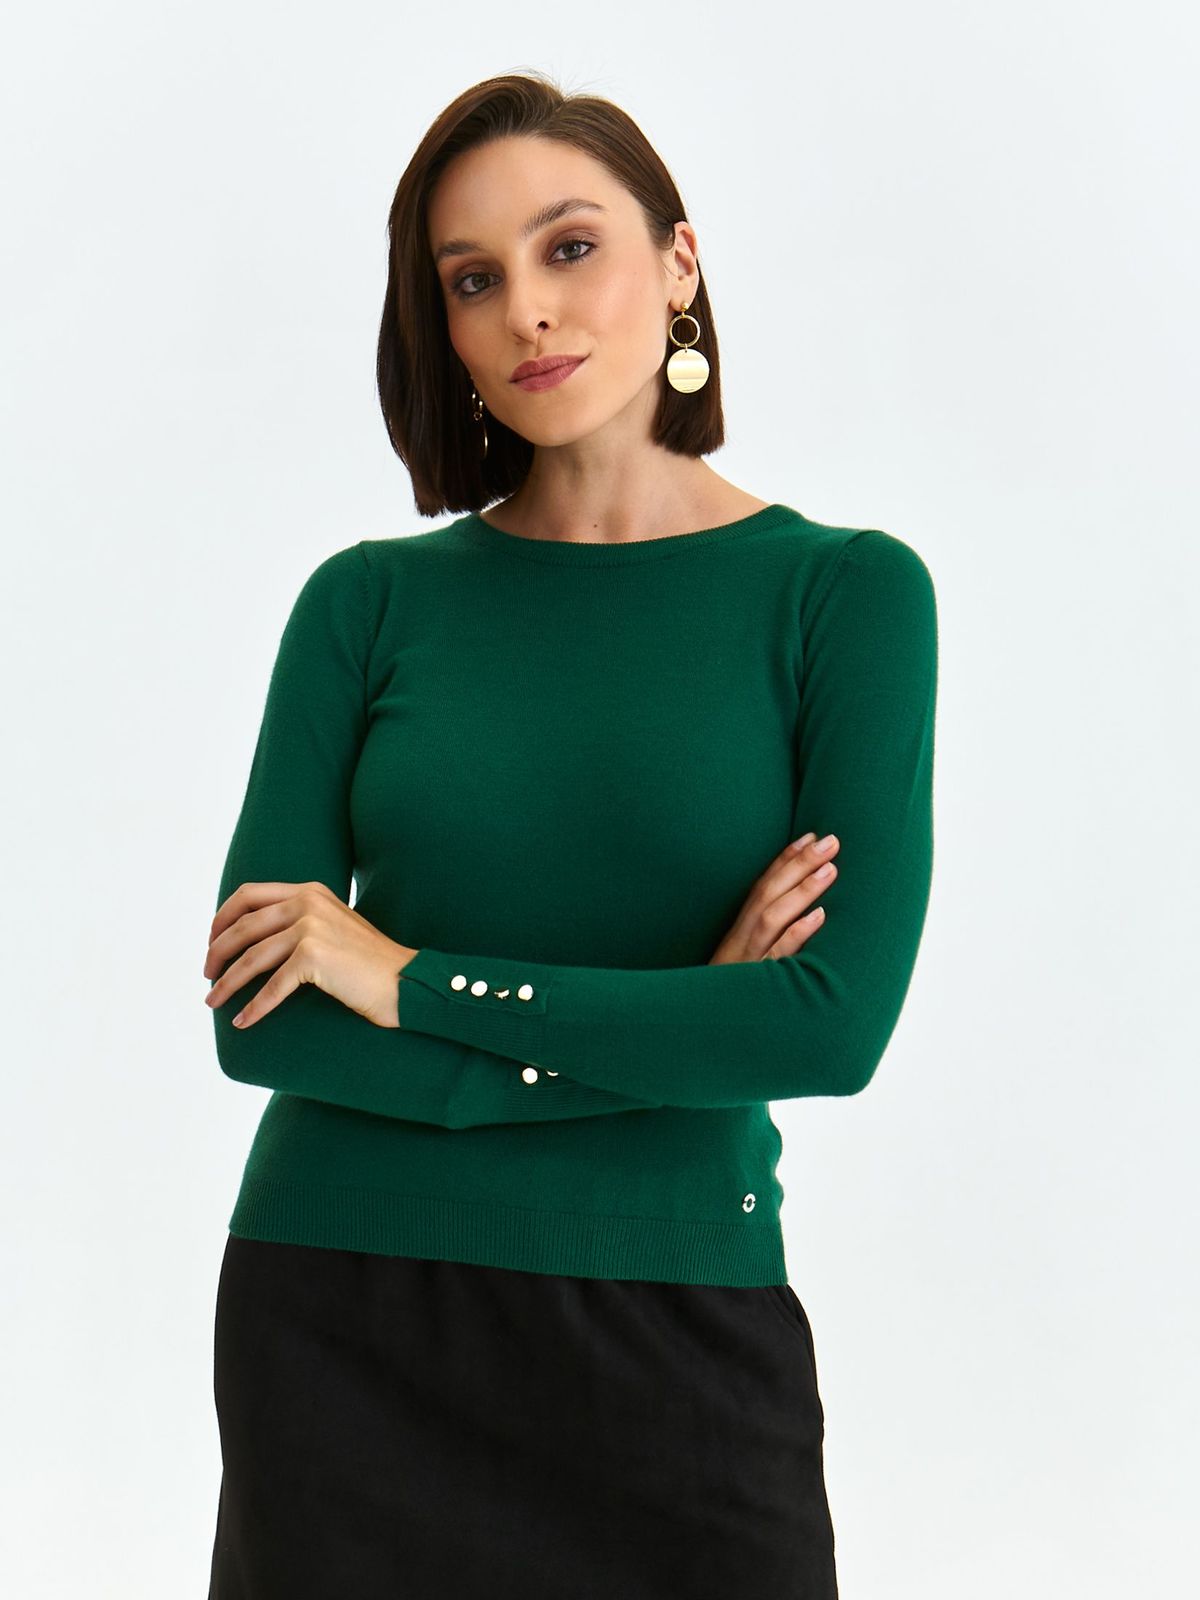 Darkgreen sweater knitted with button accessories